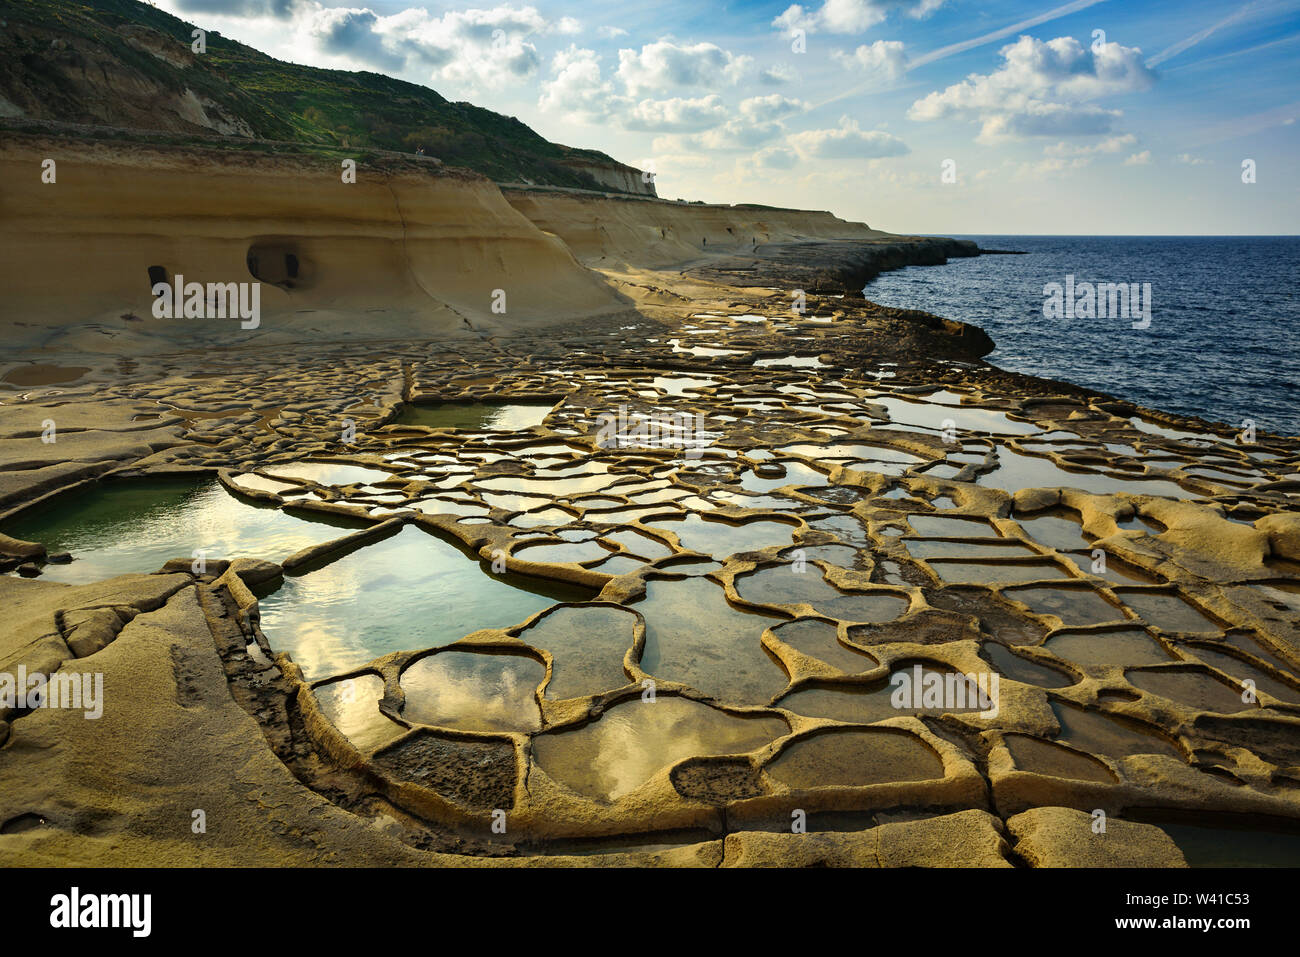 Salt evaporation pans on Malta. Ponds near sea filled with water at sunny day, february 2019 Stock Photo